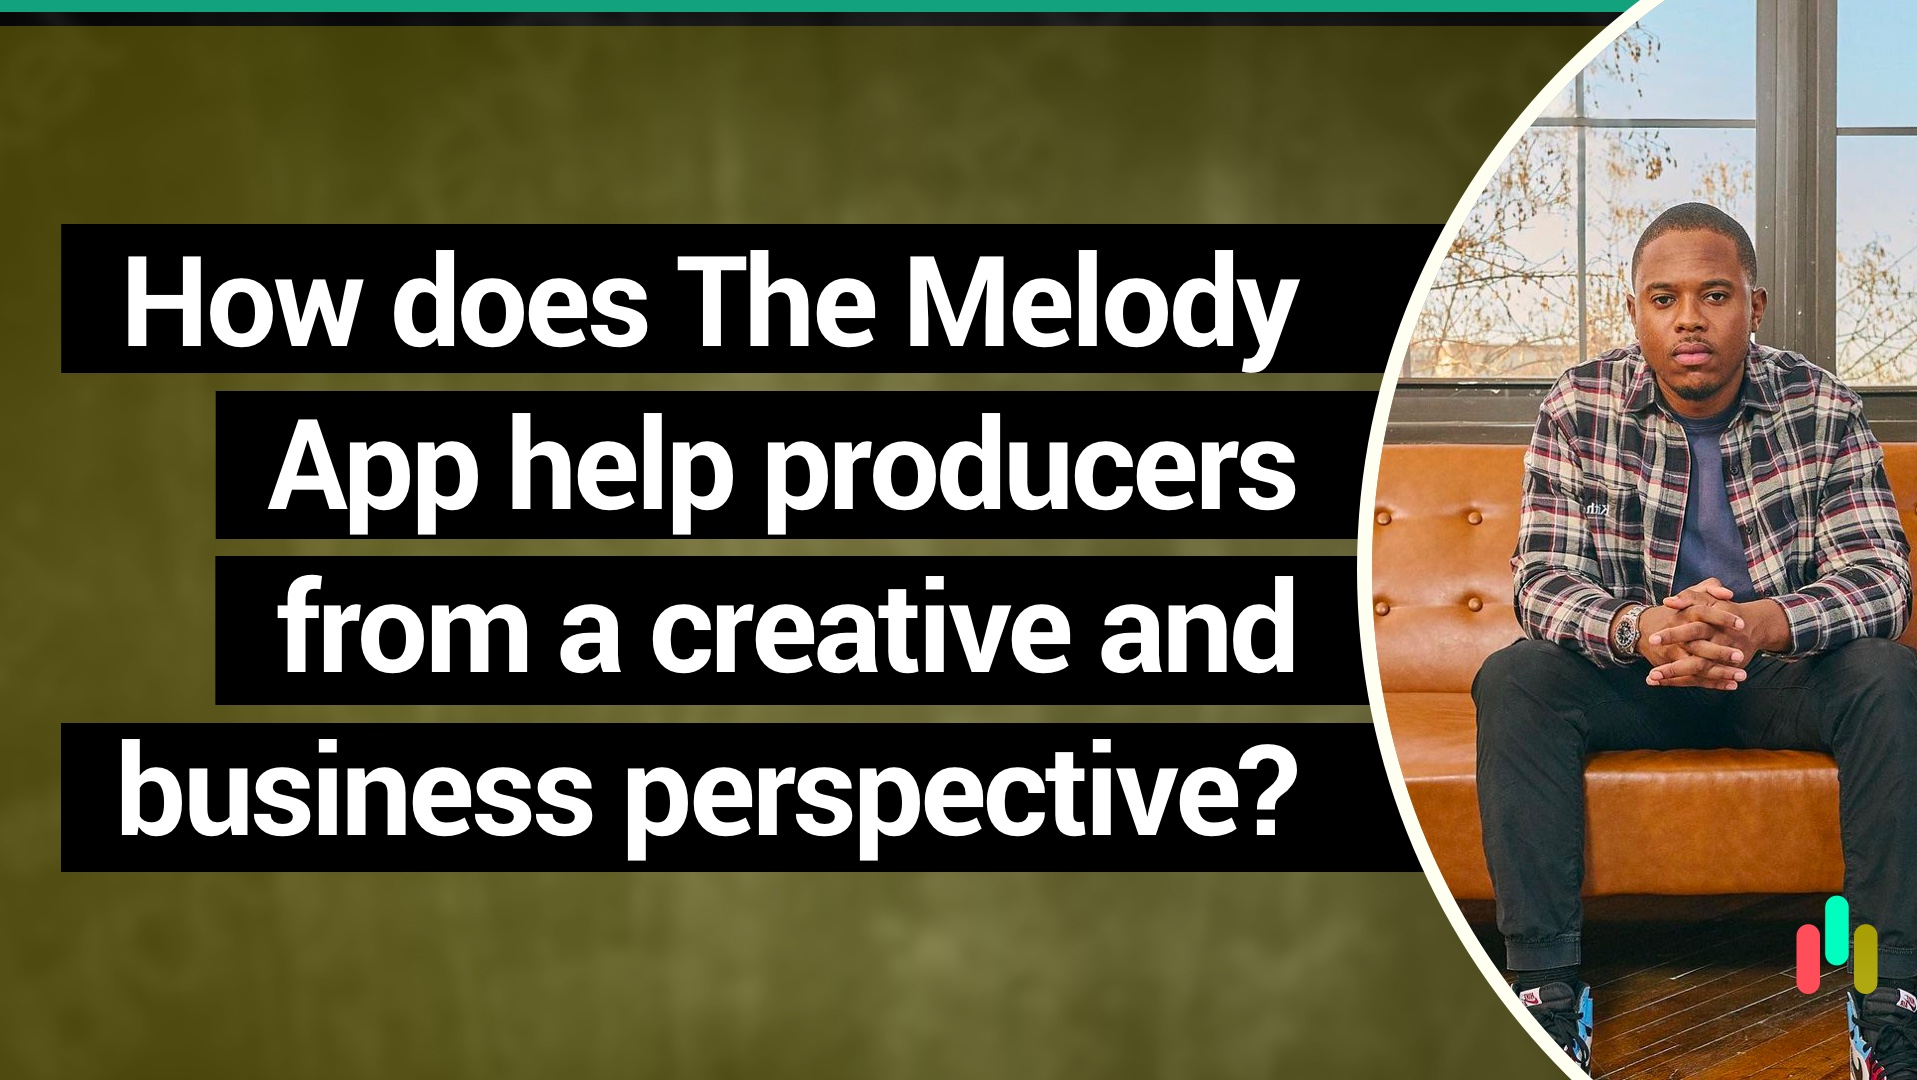 Prominent entertainment attorney, @evgle Co-Founder/COO, music business professor, entrepreneur, and member of the Board of Advisors for The Melody App @esqfowlkes answers the question: “How does @themelodyapp help producers from a creative and business perspective?” 🤔🤷🏽‍♂️🎯